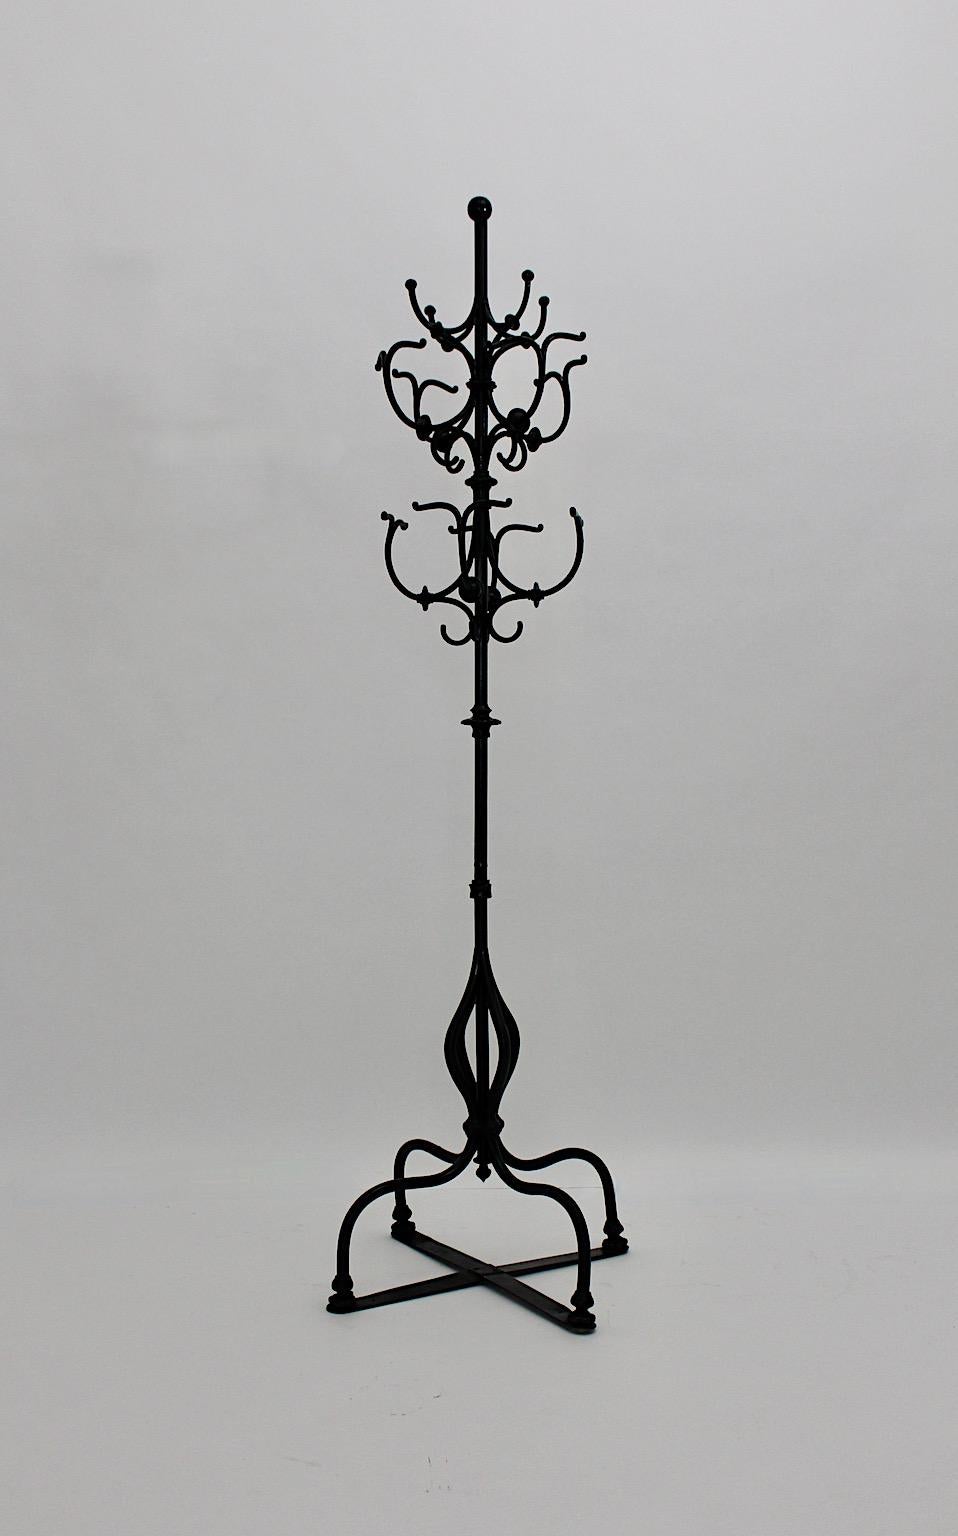 Historicism antique vintage coat rack or coat stand from black lacquered cast and hammered iron circa 1890 Austria
Wonderful and outstanding coat rack with many hangers and racks, very stable and sturdy through its weight and four feet base